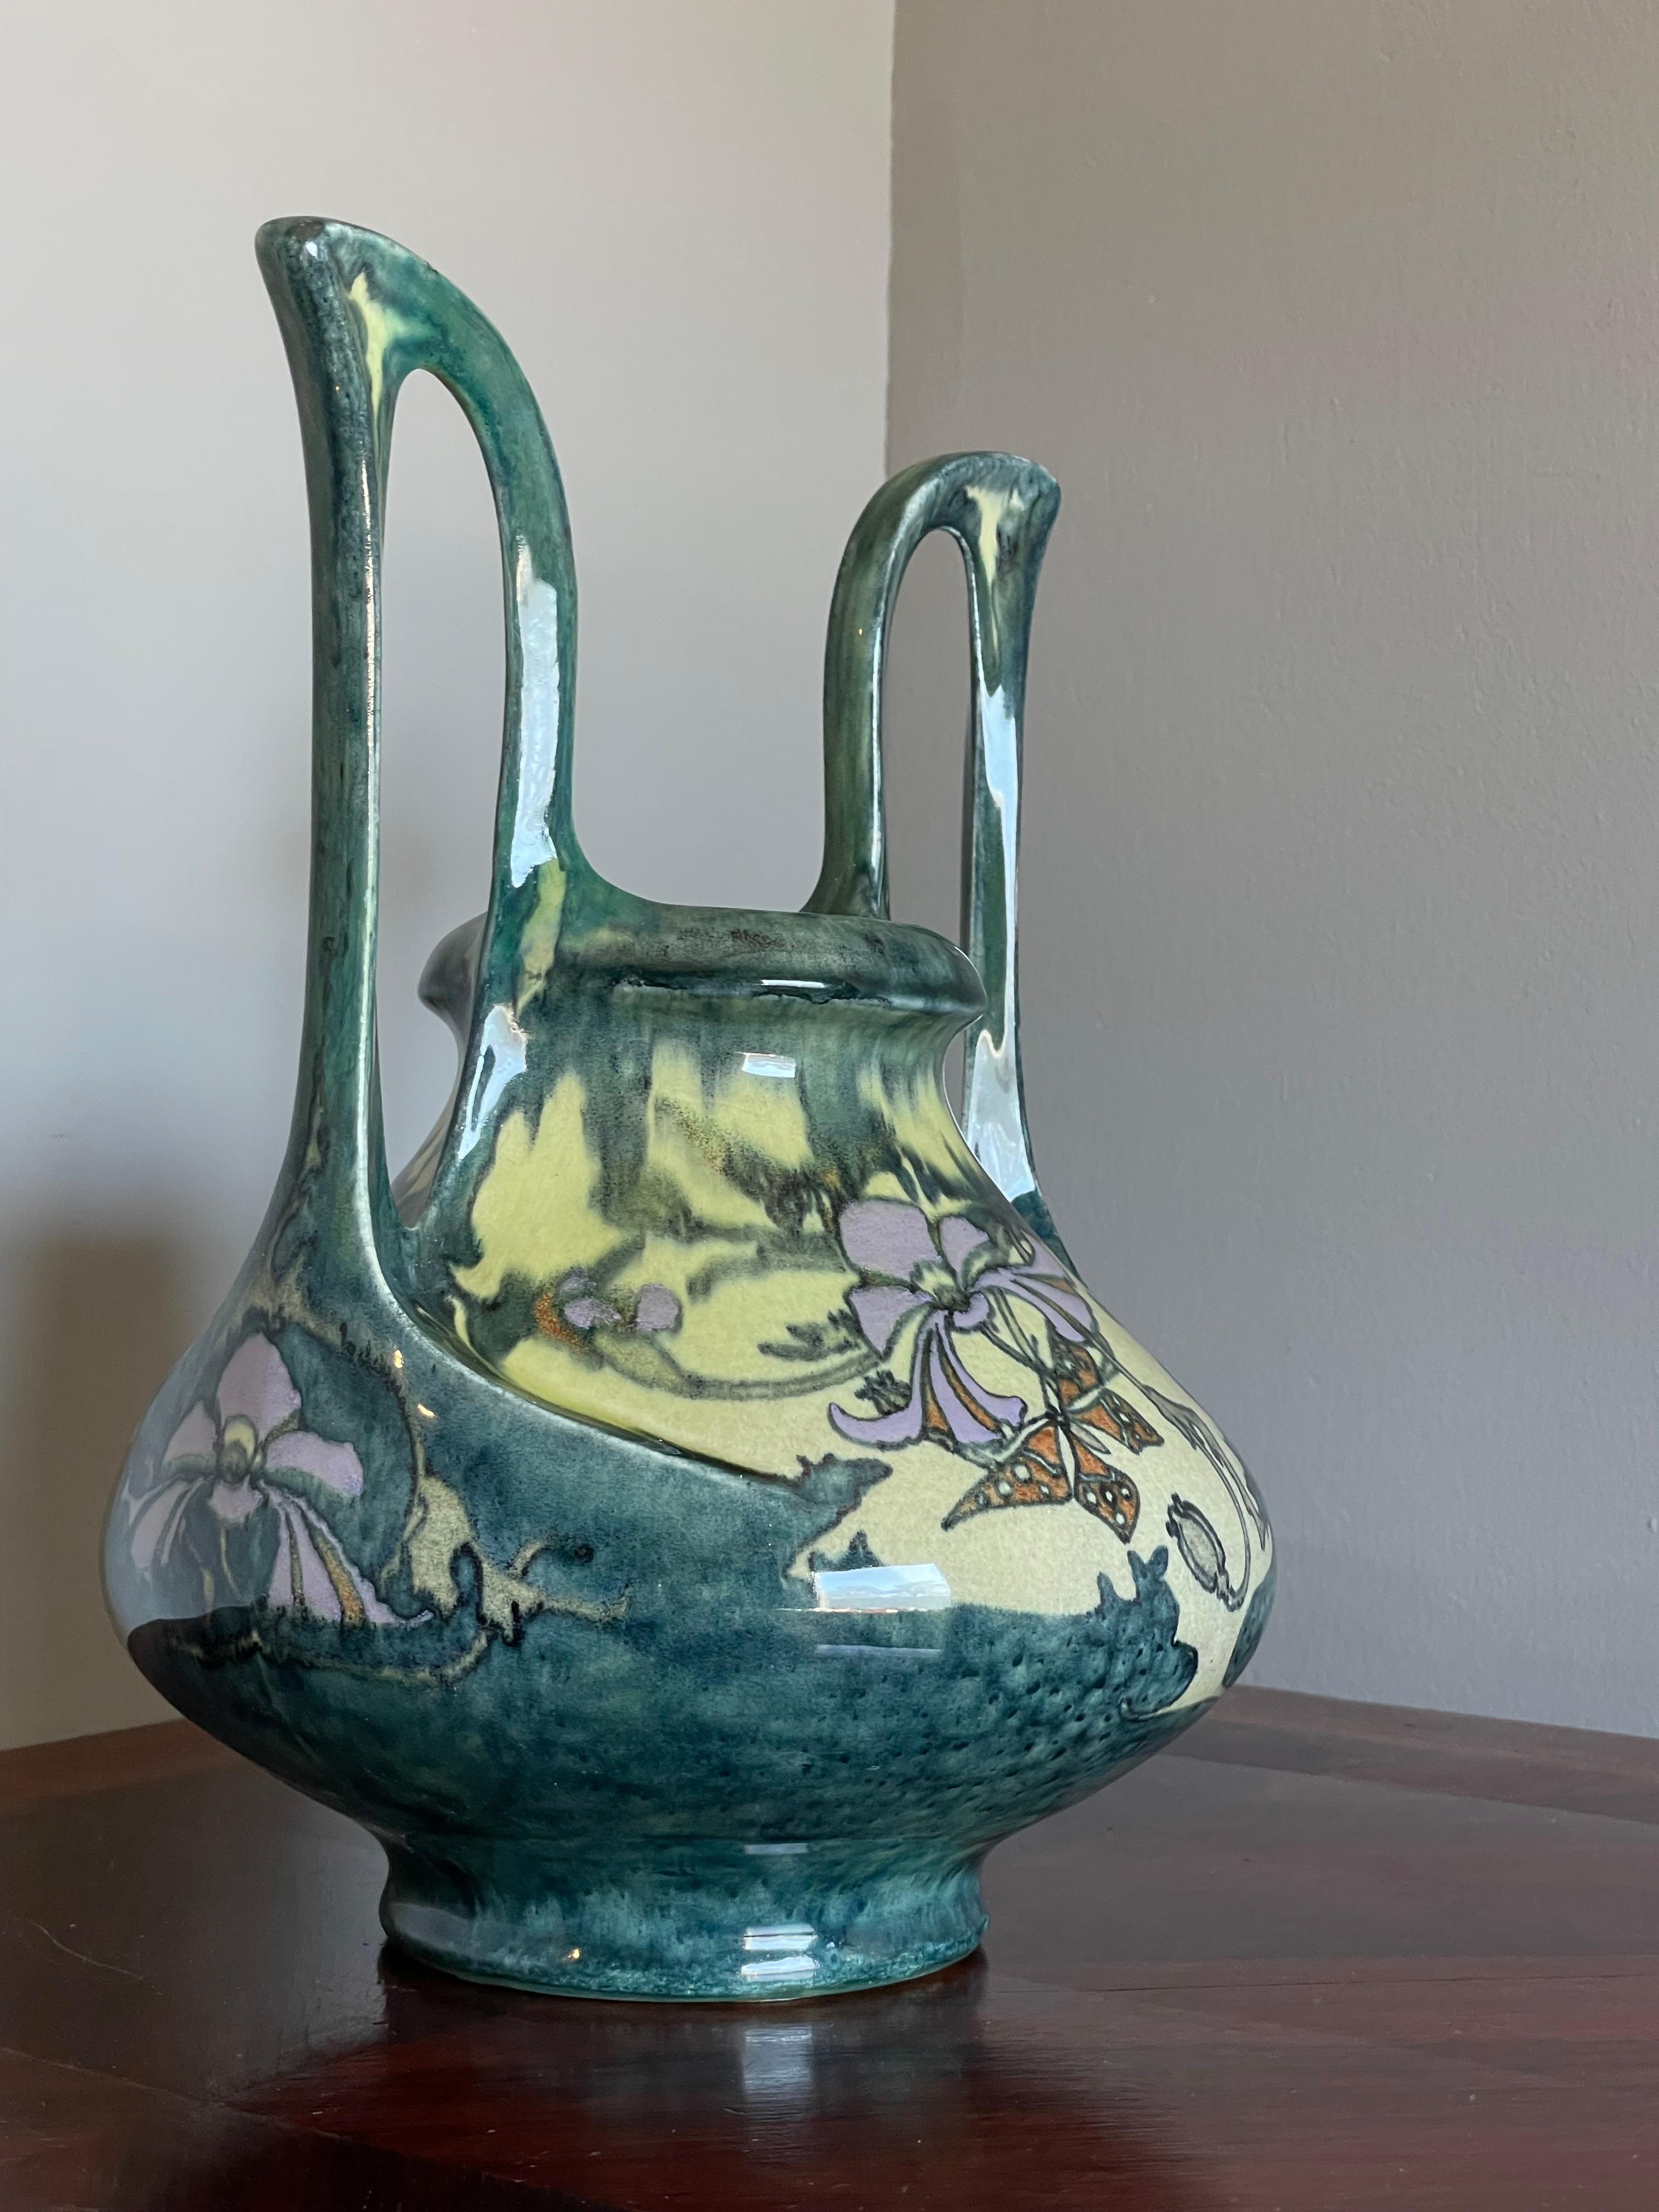 Stunning Dutch Arts and Crafts Hand Painted W. Butterflies Vase by J. Mijnlieff For Sale 7